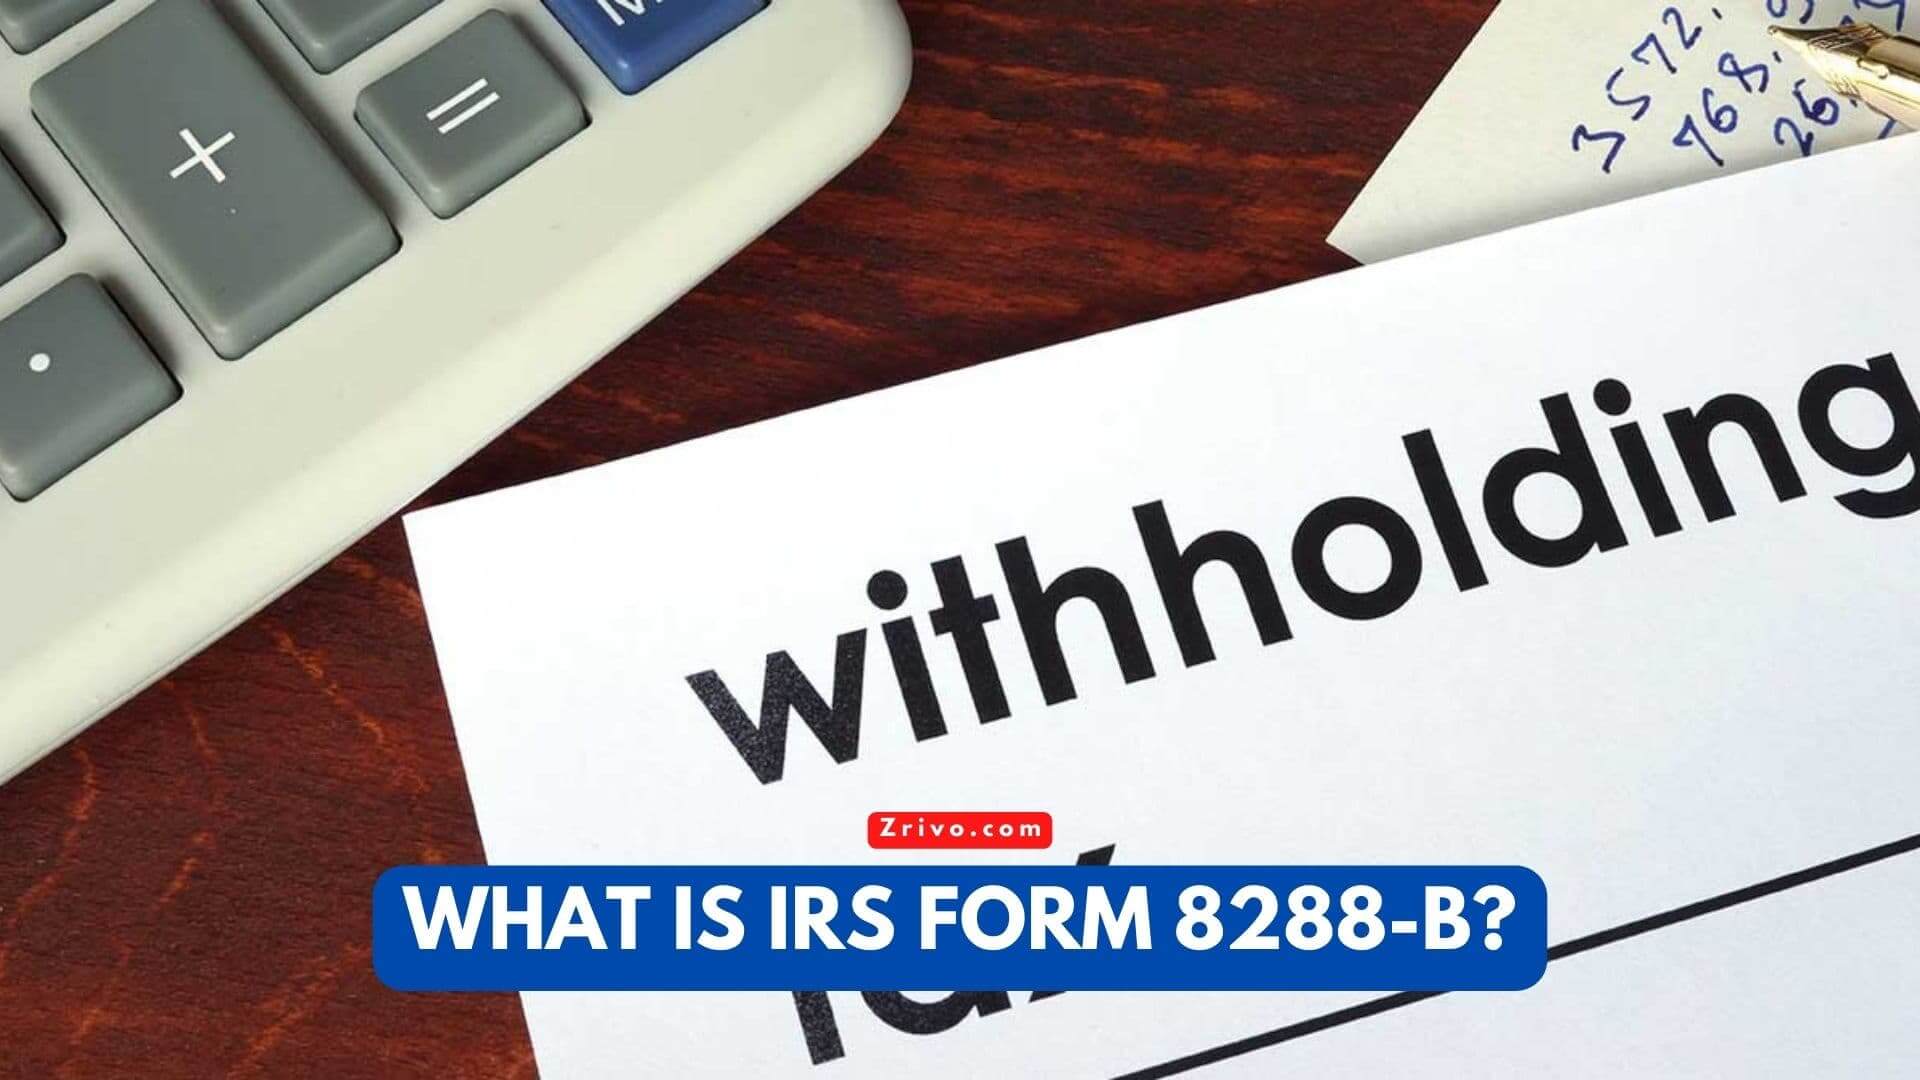 What Is IRS Form 8288-B?